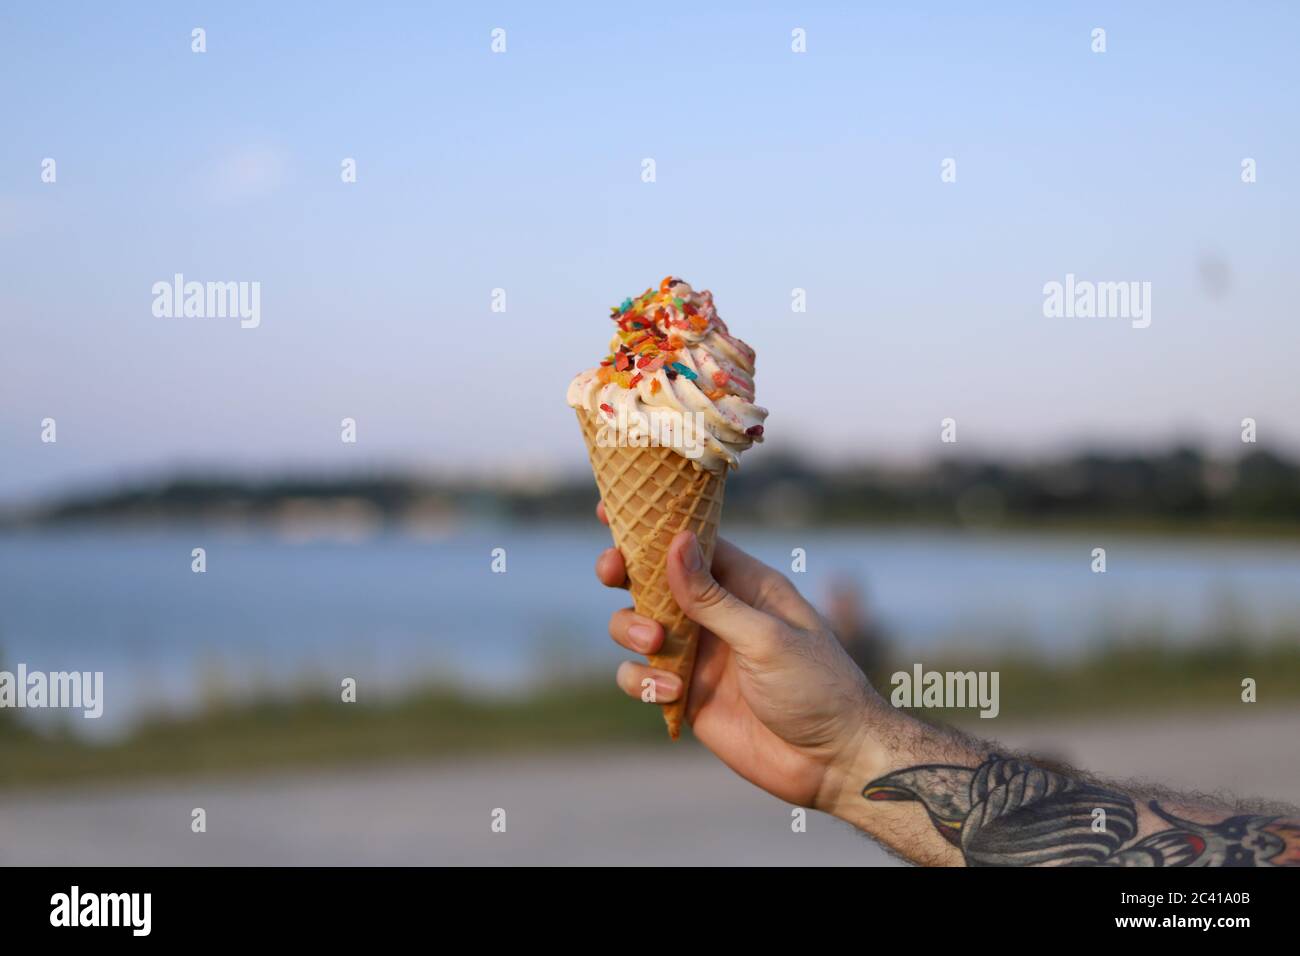 A man's hand holds up a big waffle cone ice cream with sprinkles Stock Photo